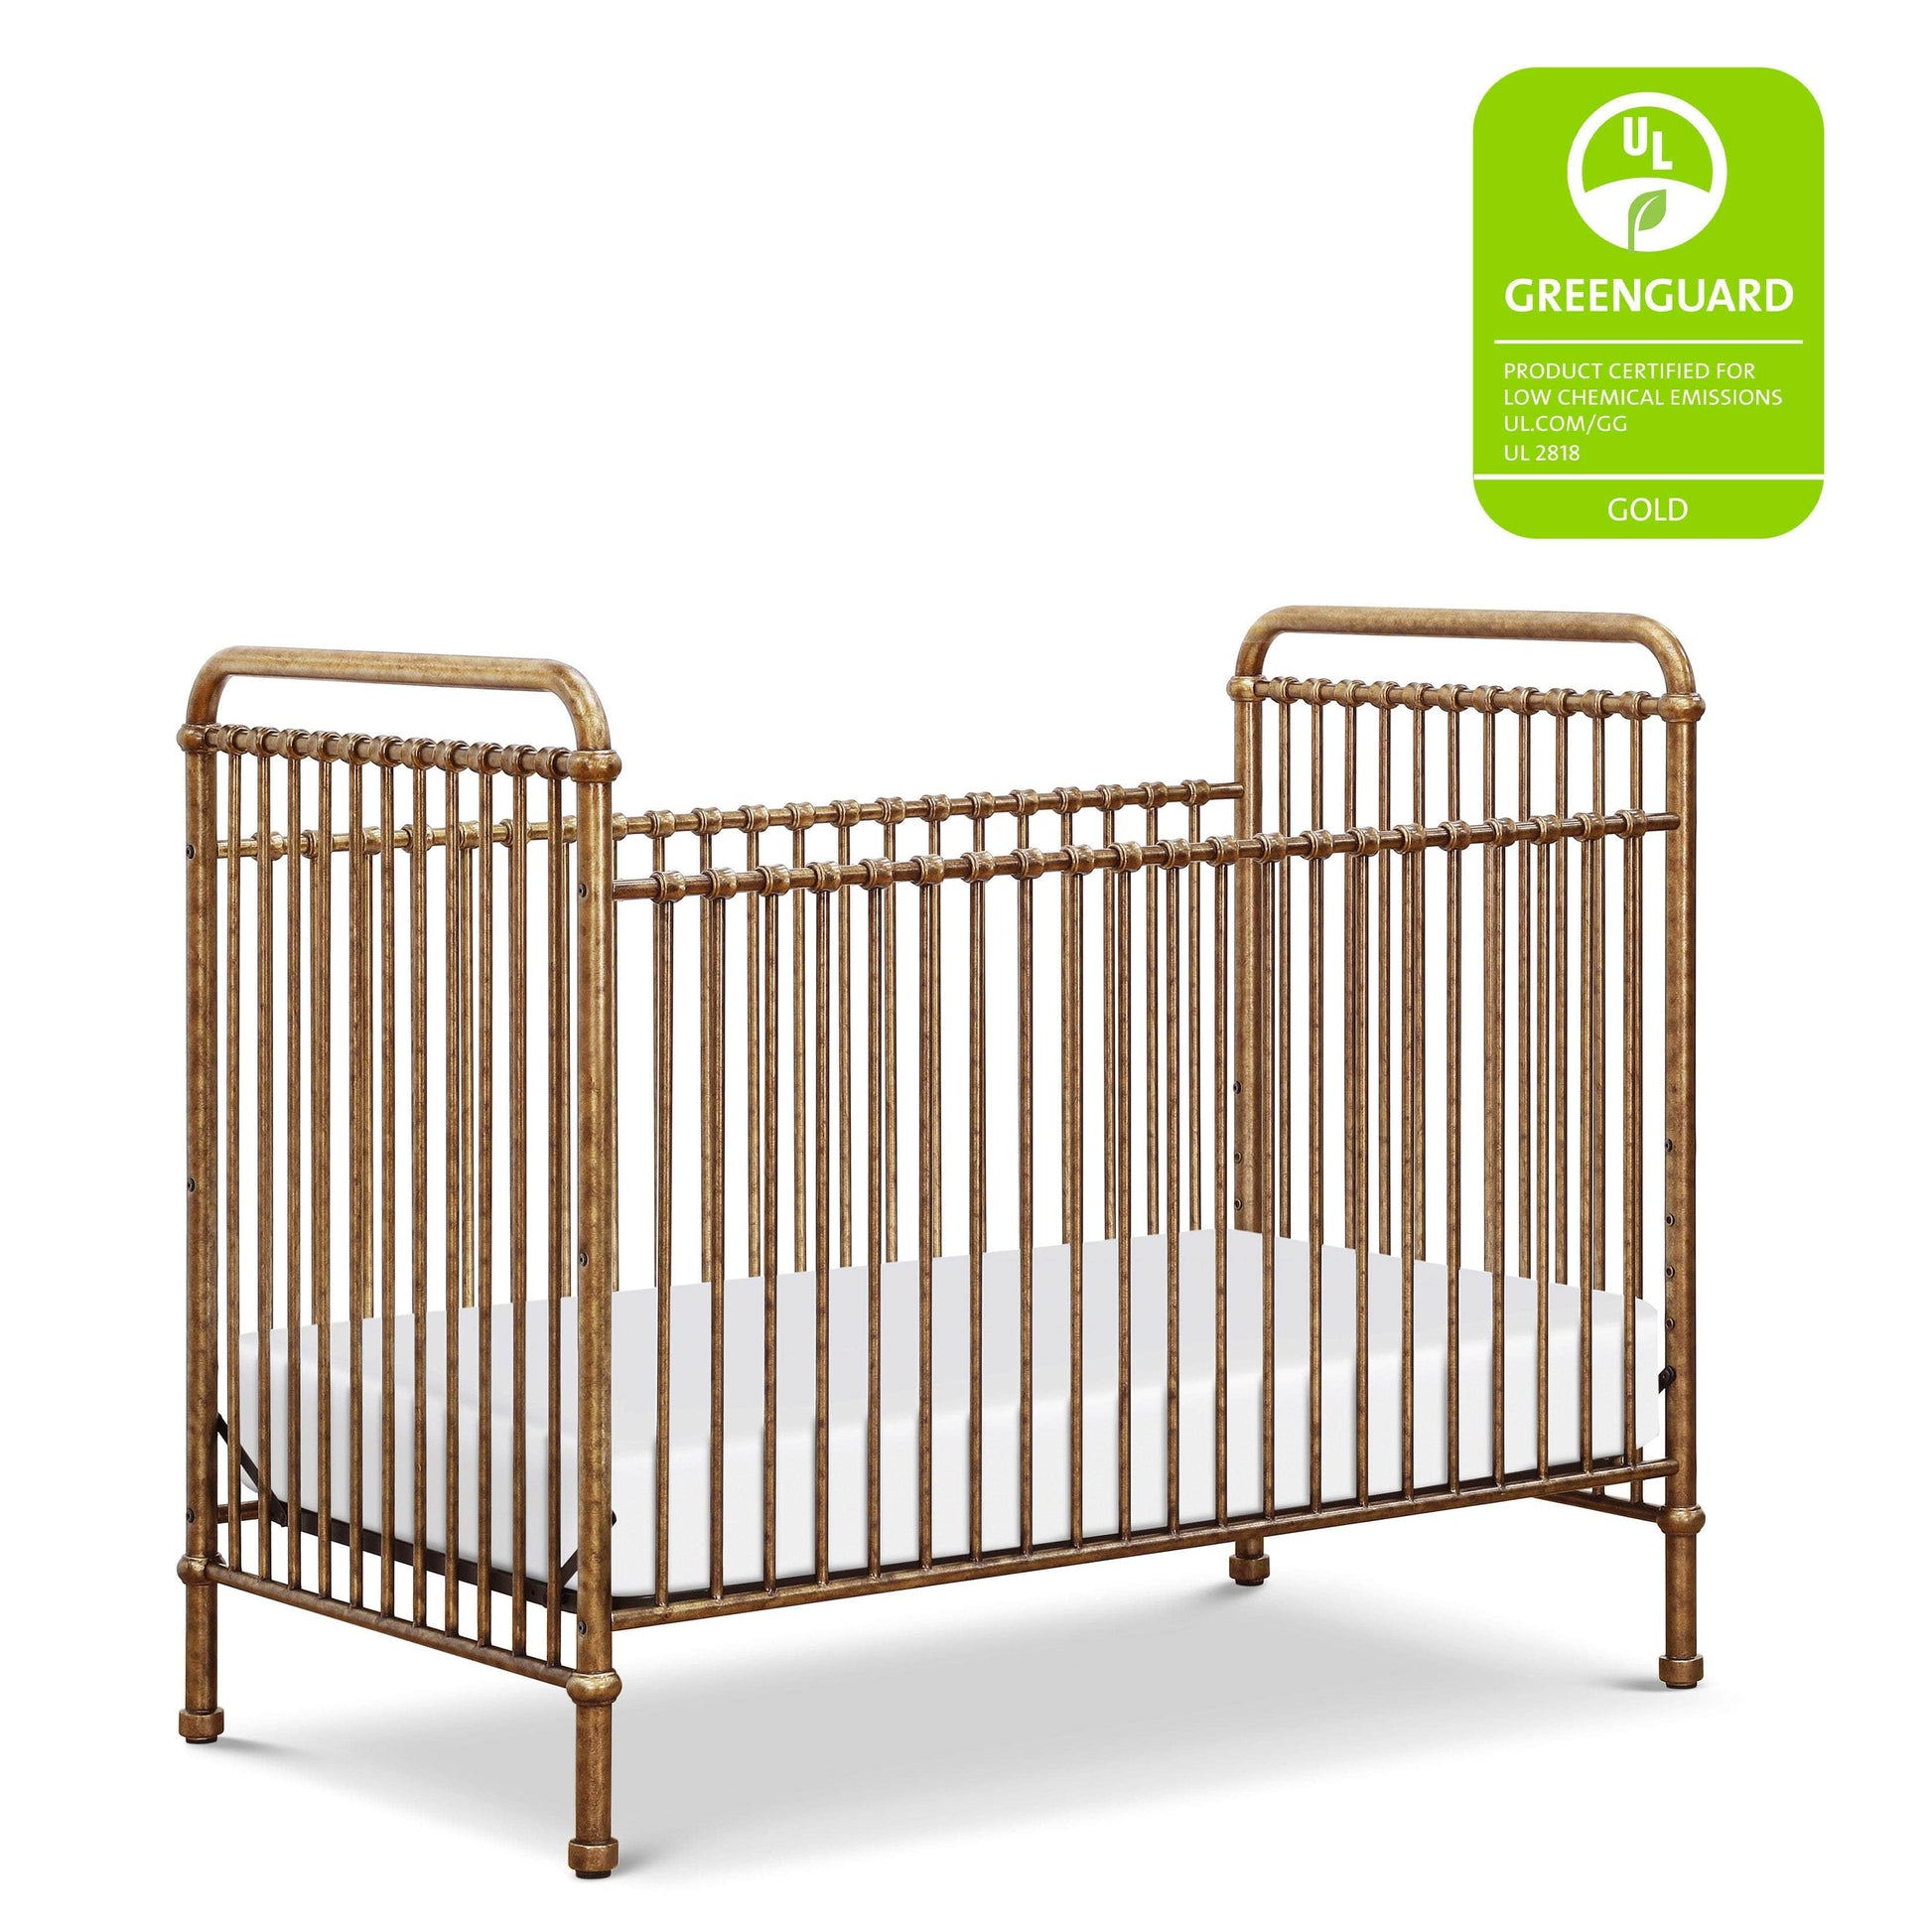 M15501VG,Abigail 3-in-1 Convertible Crib in Vintage Gold